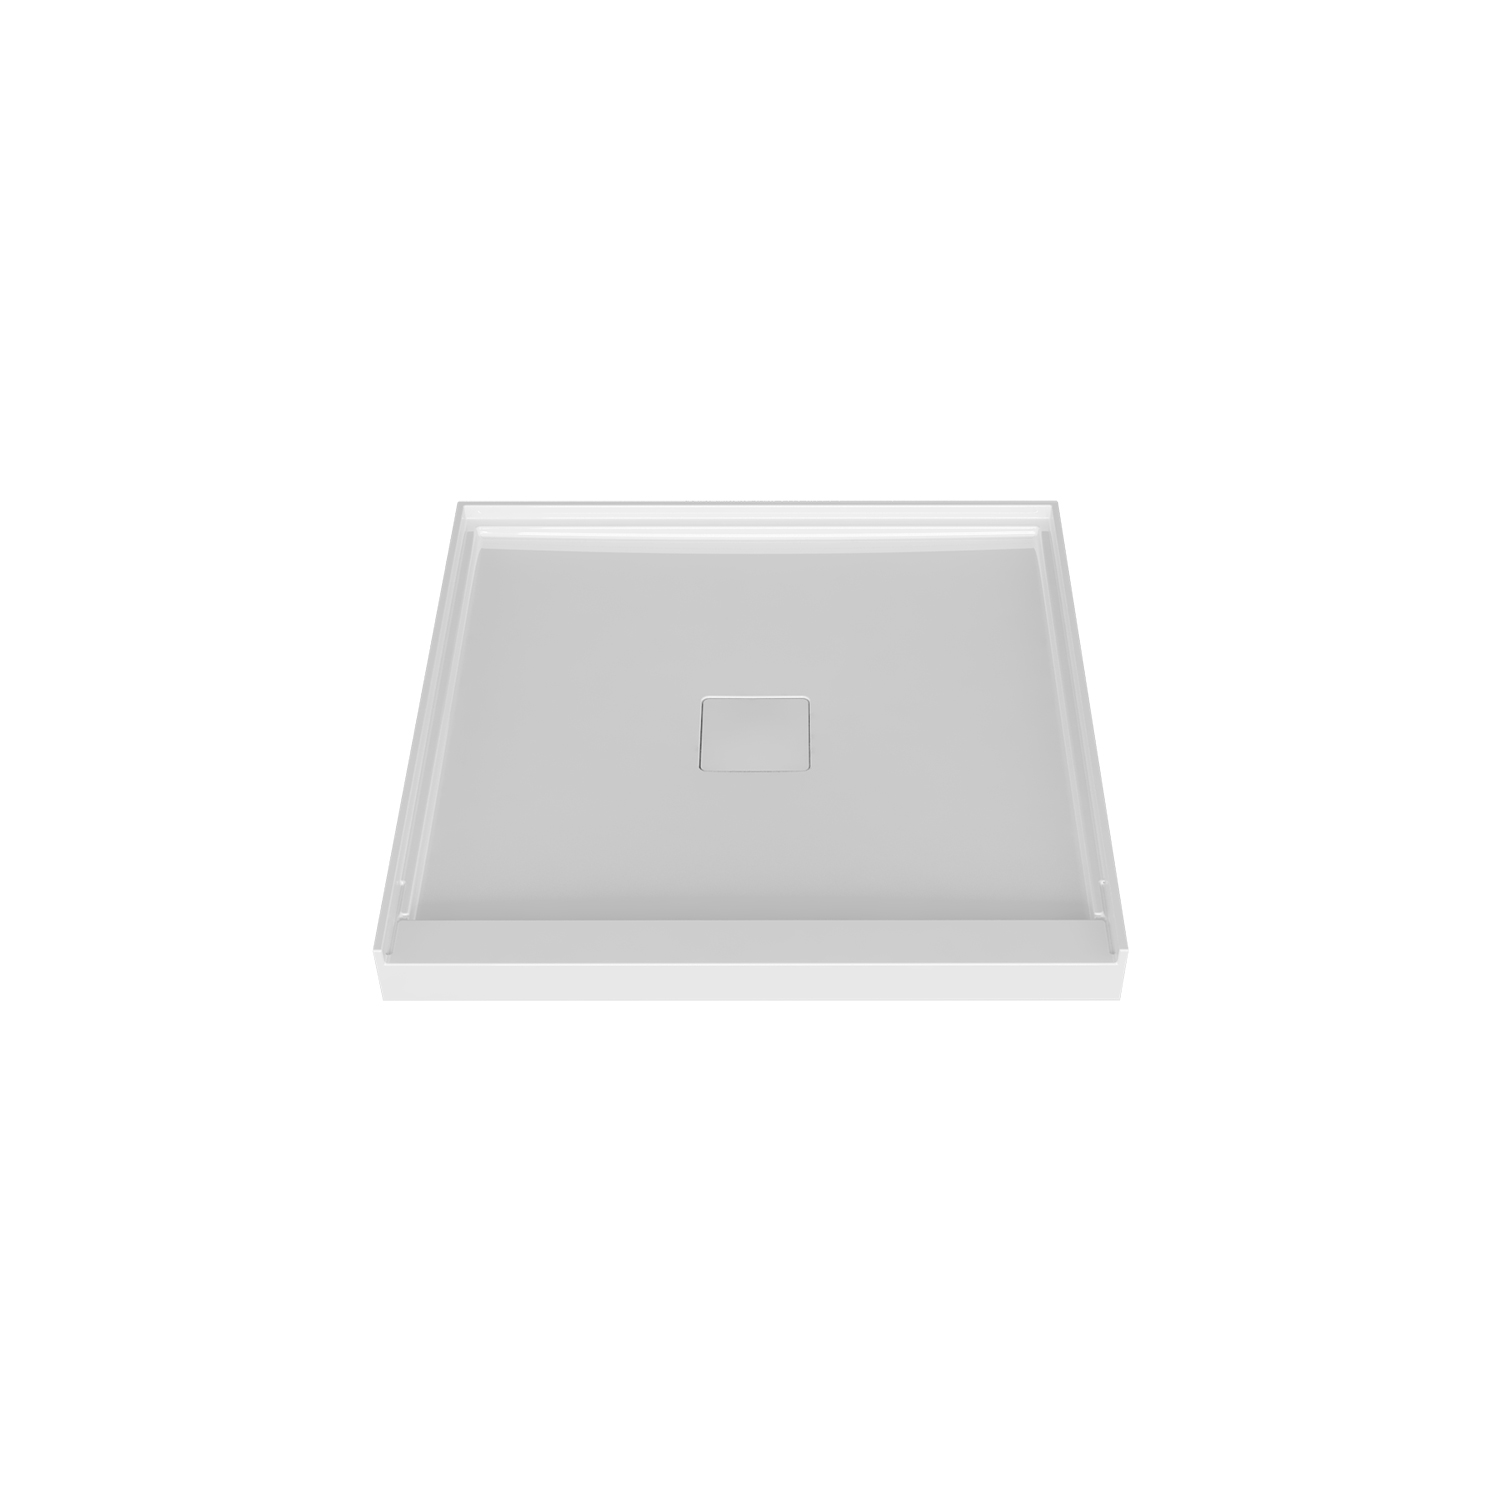 Shower base 42 x 42, in alcove, in glossy white